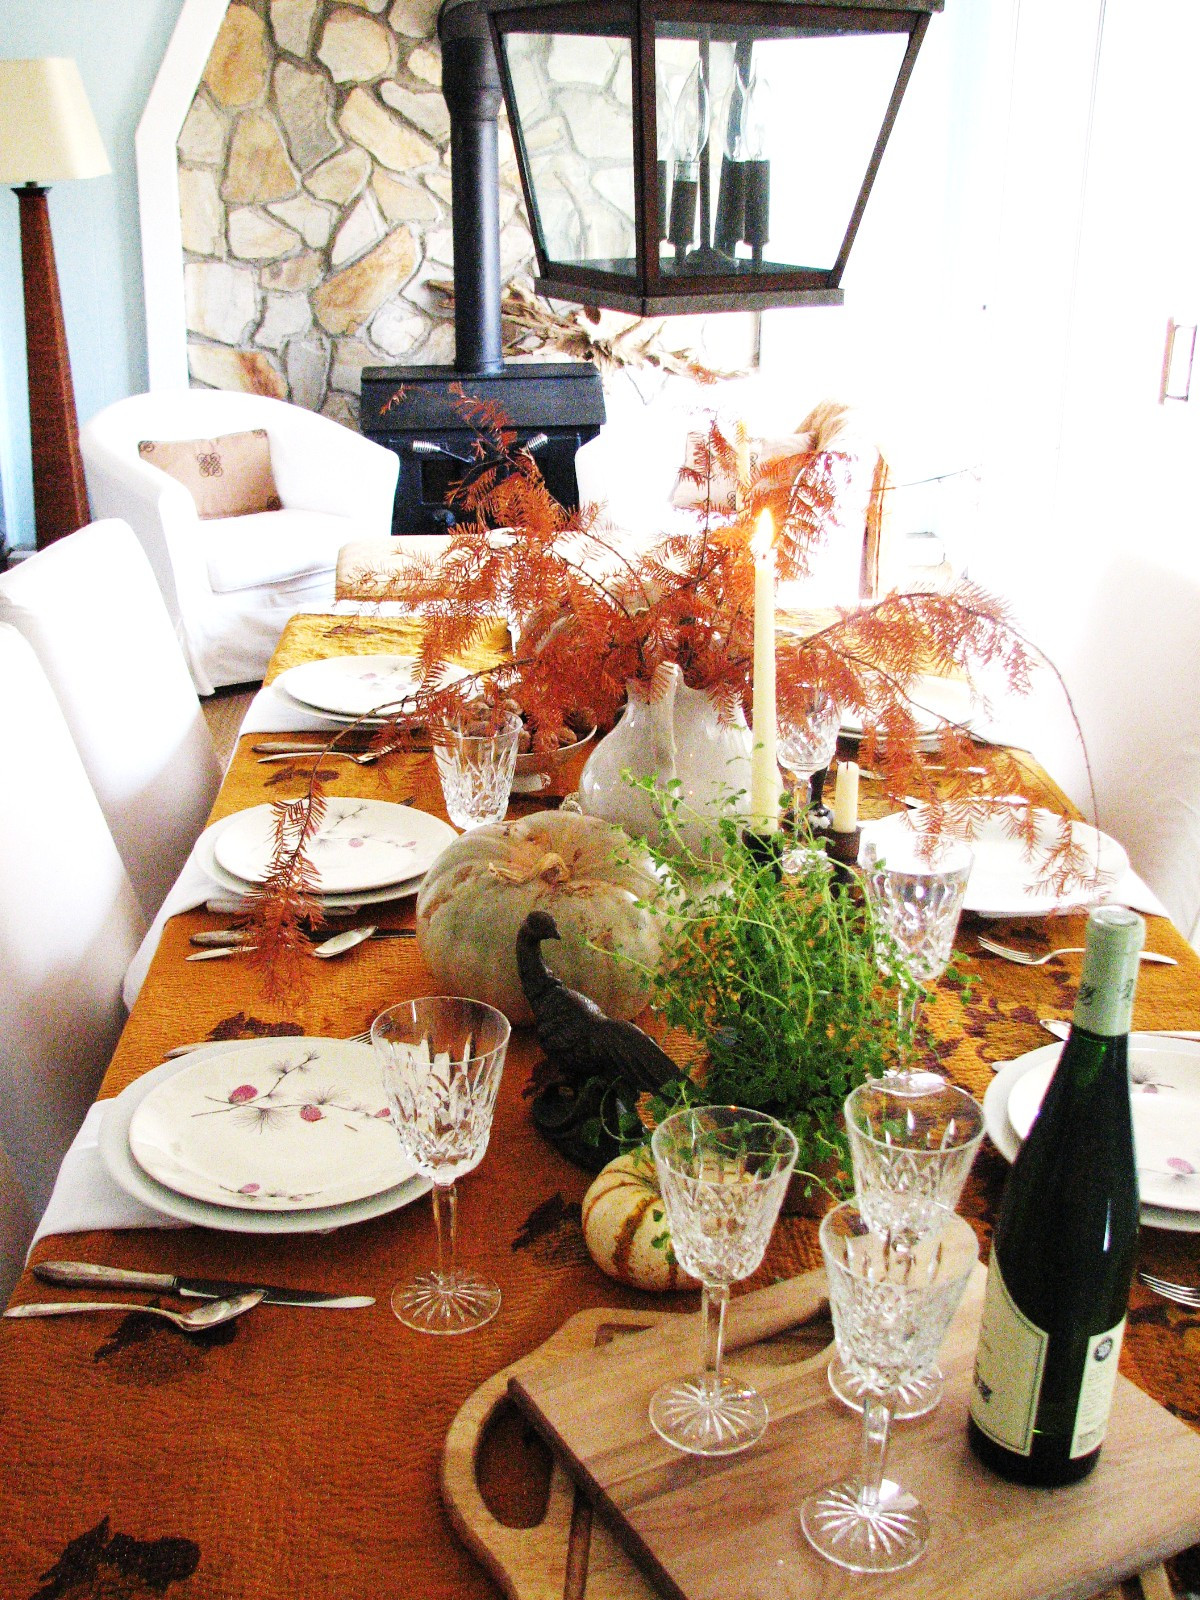 Pinterest Thanksgiving Table Ideas
 Finding My Aloha Pinteresting Thanksgiving Table Ideas